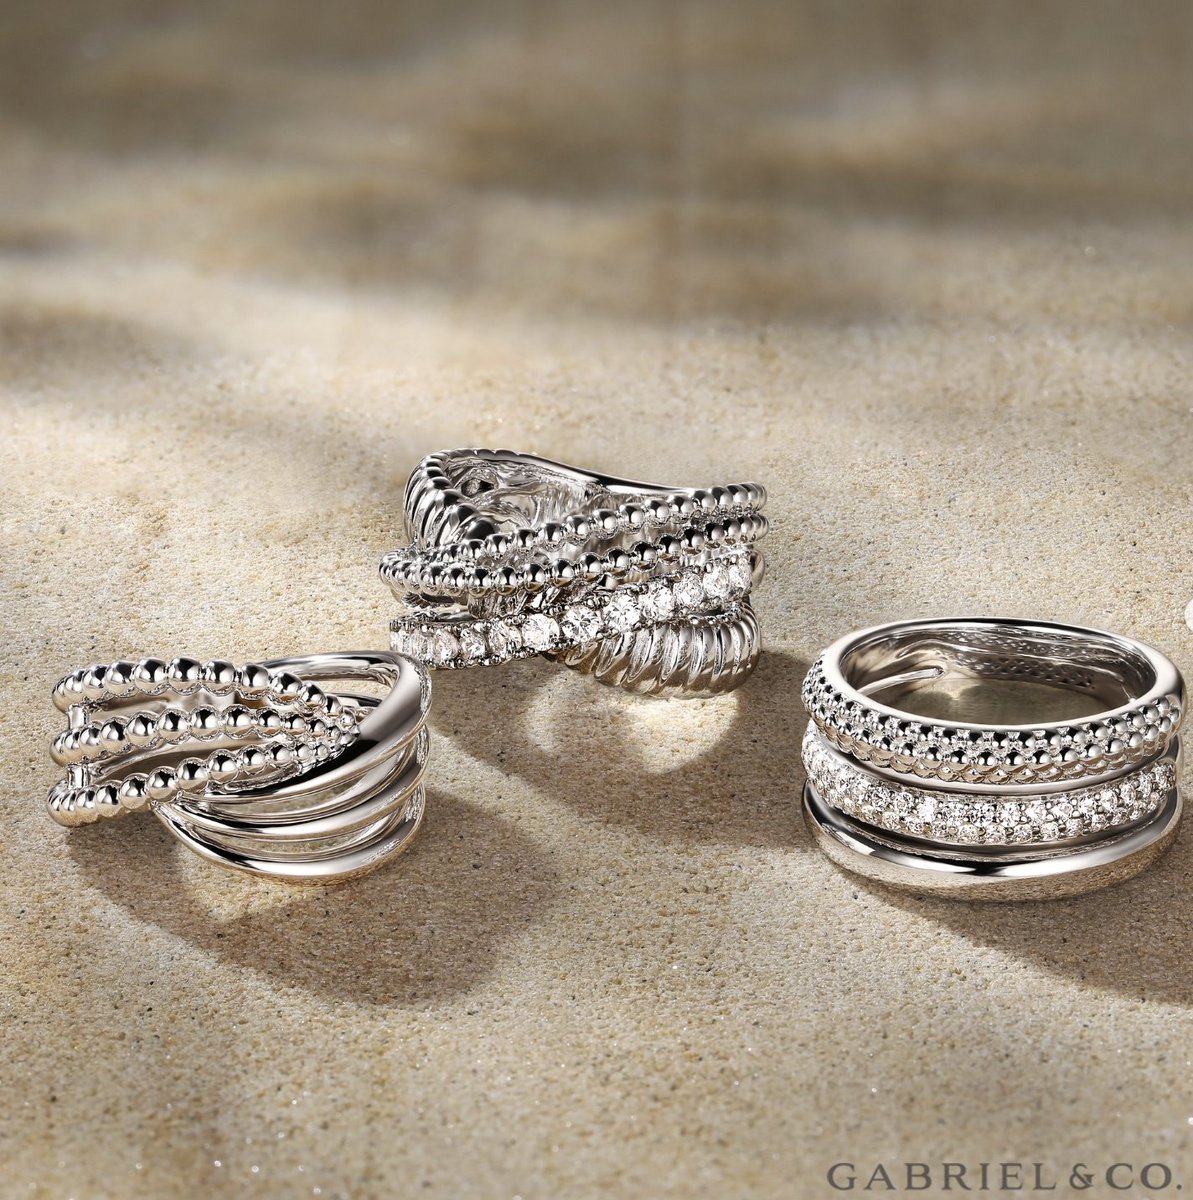 Step into summer with our stunning sterling silver collection. ☀️

gabrielny.com/925-sterling-s…

#gabrielandco #gabrielny #sterlingsilver #bujukancollection #summerjewelry #beachday #silverstyle #jewelryinspiration #statementpieces #vacationessentials #trendyaccessories